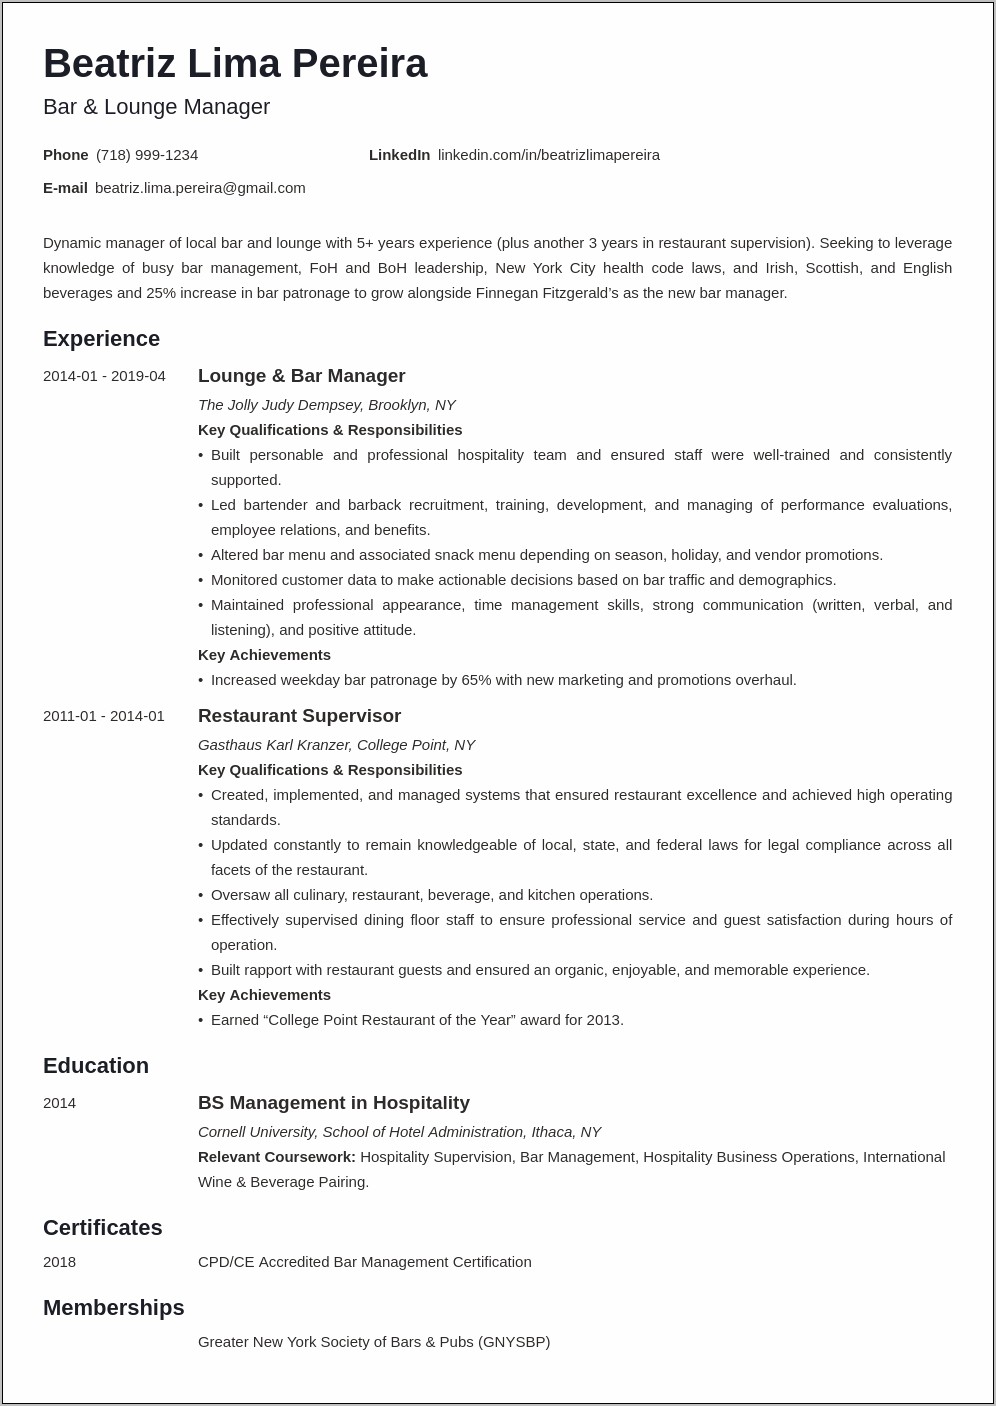 Beauty Supply Store Manager Resume